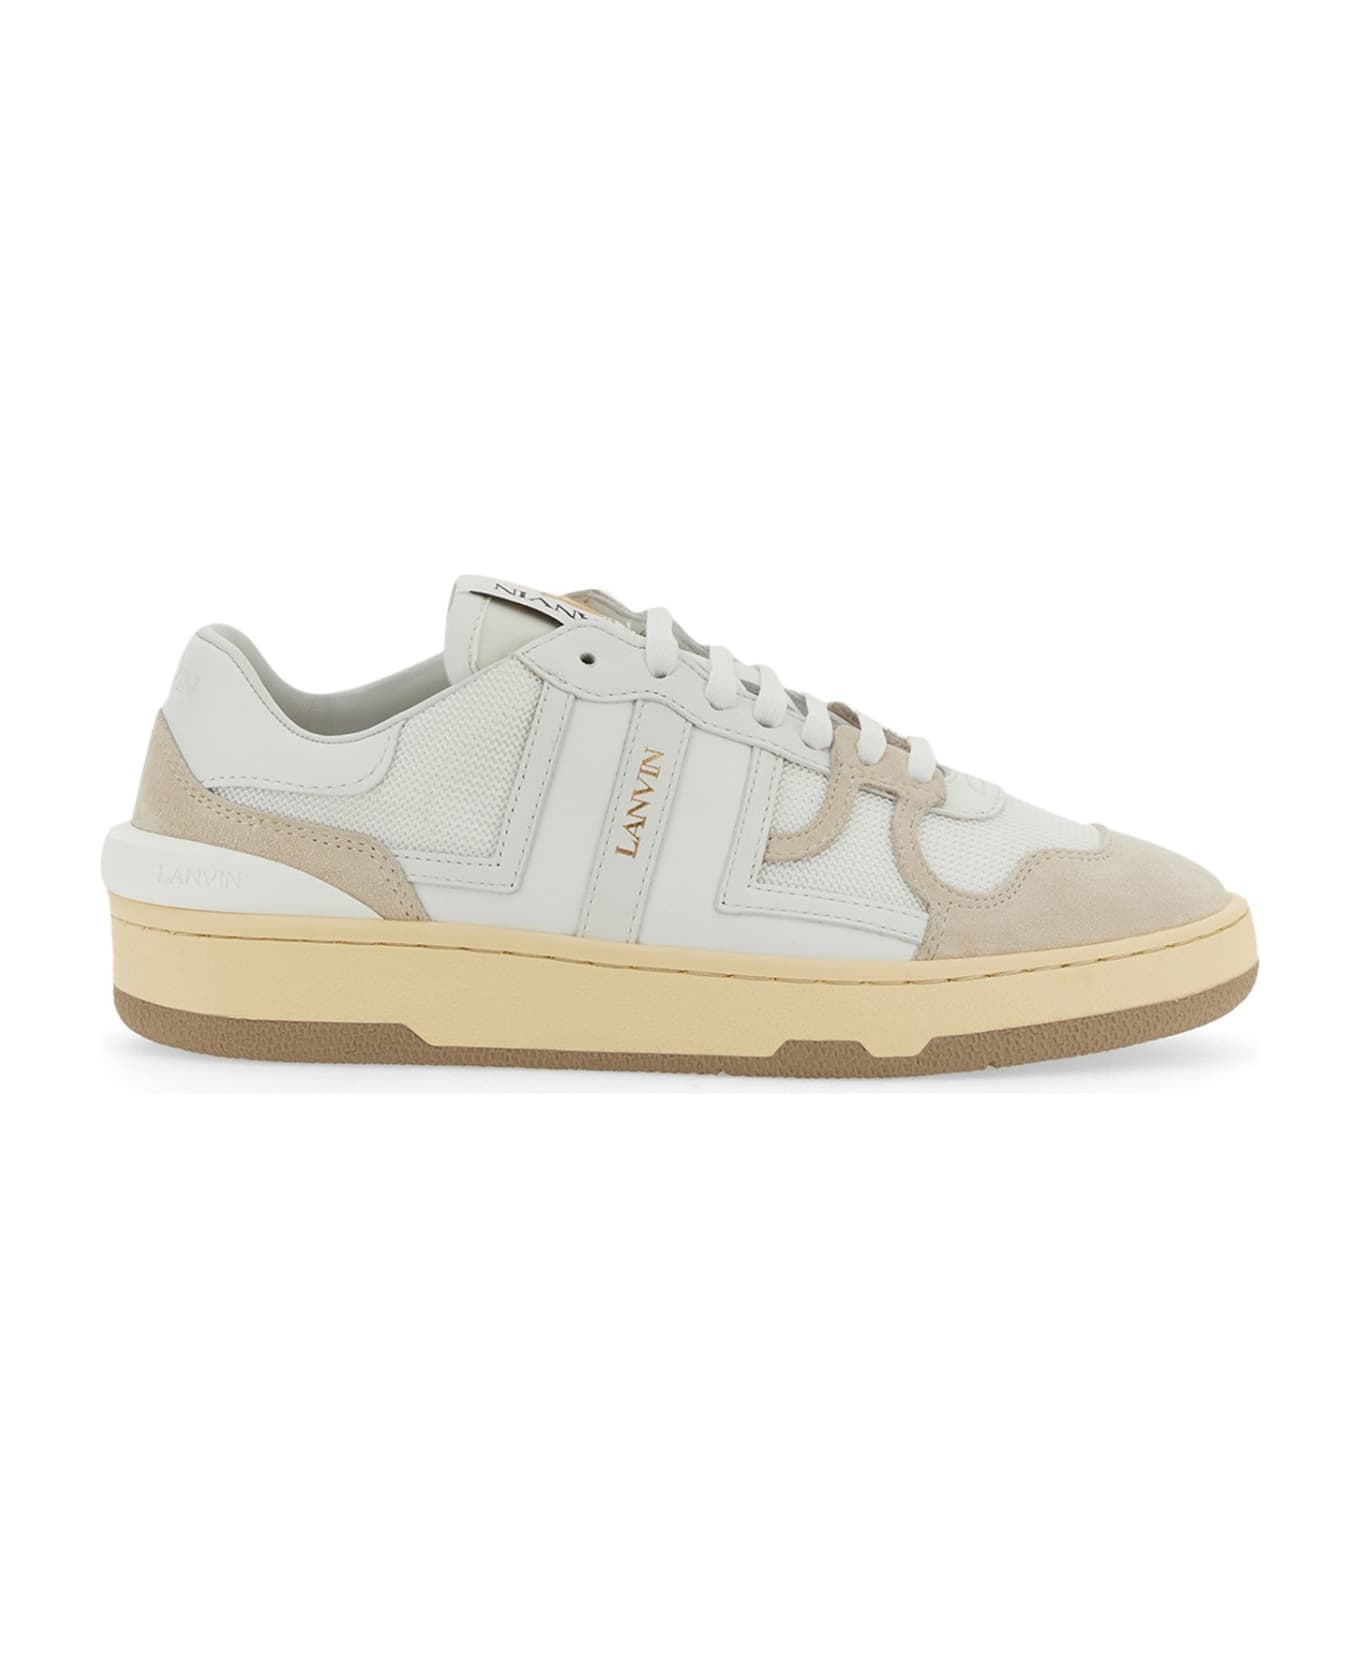 Lanvin Mesh, Suede And Nappa Leather Sneaker - White スニーカー